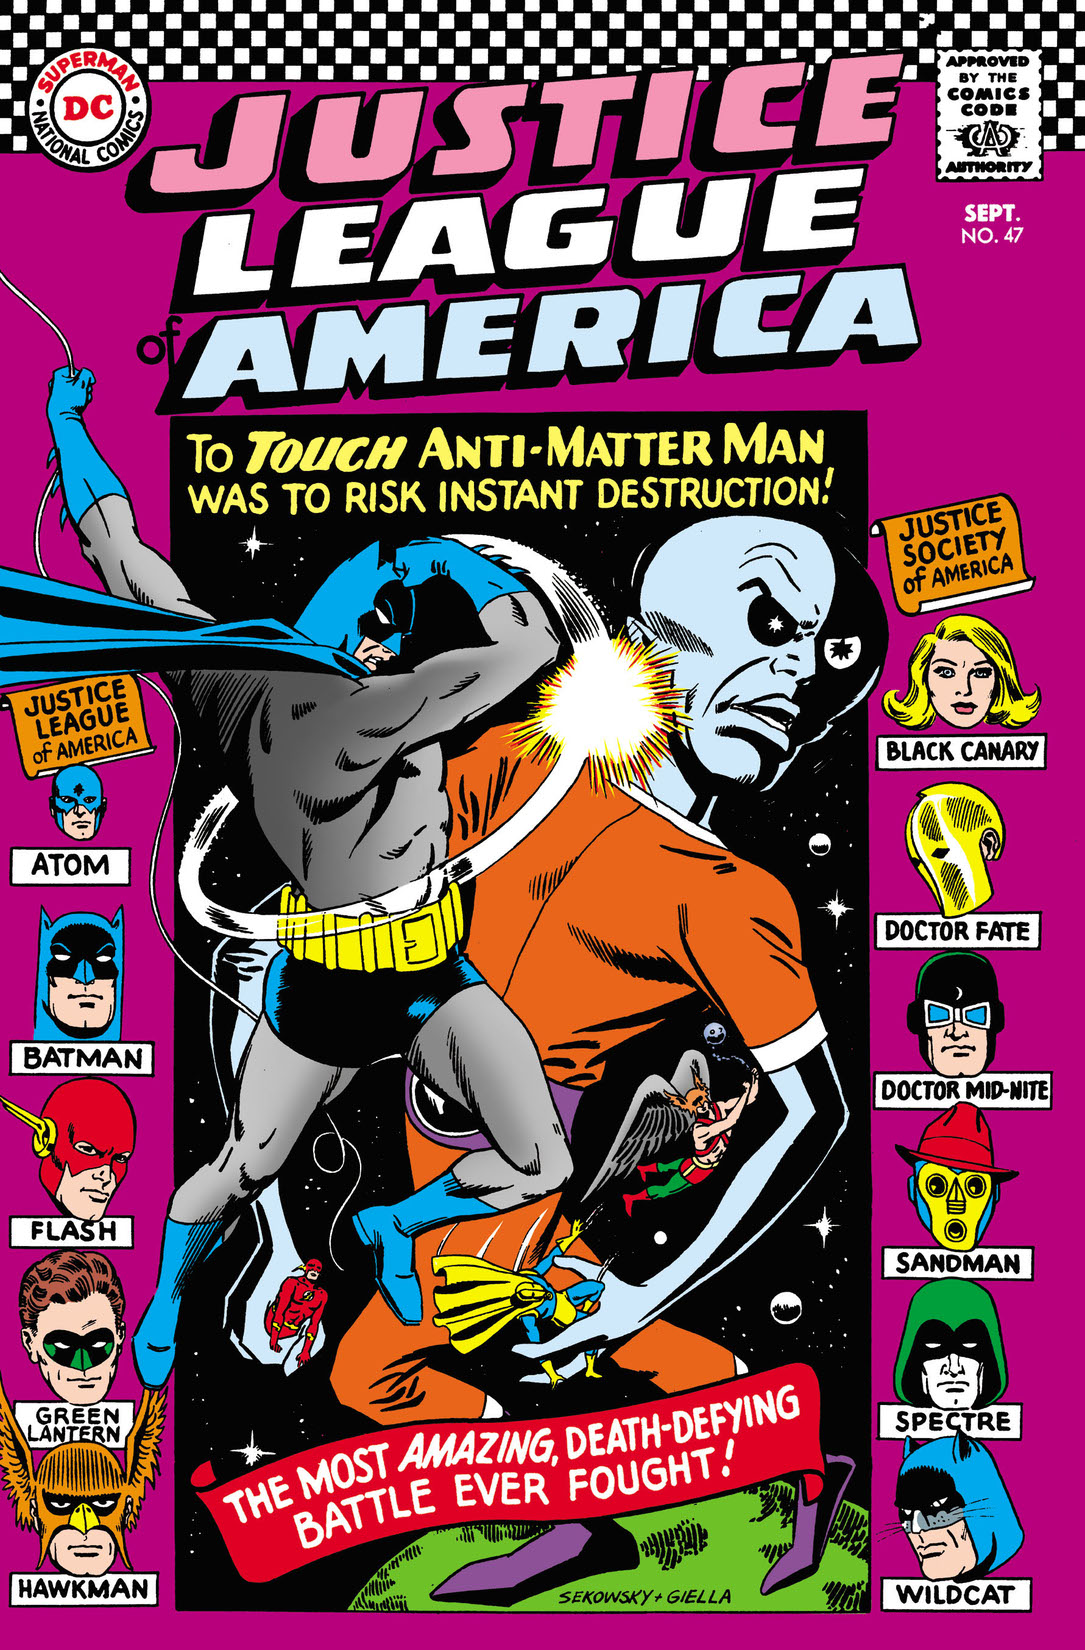 Justice League of America (1960-) #47 preview images